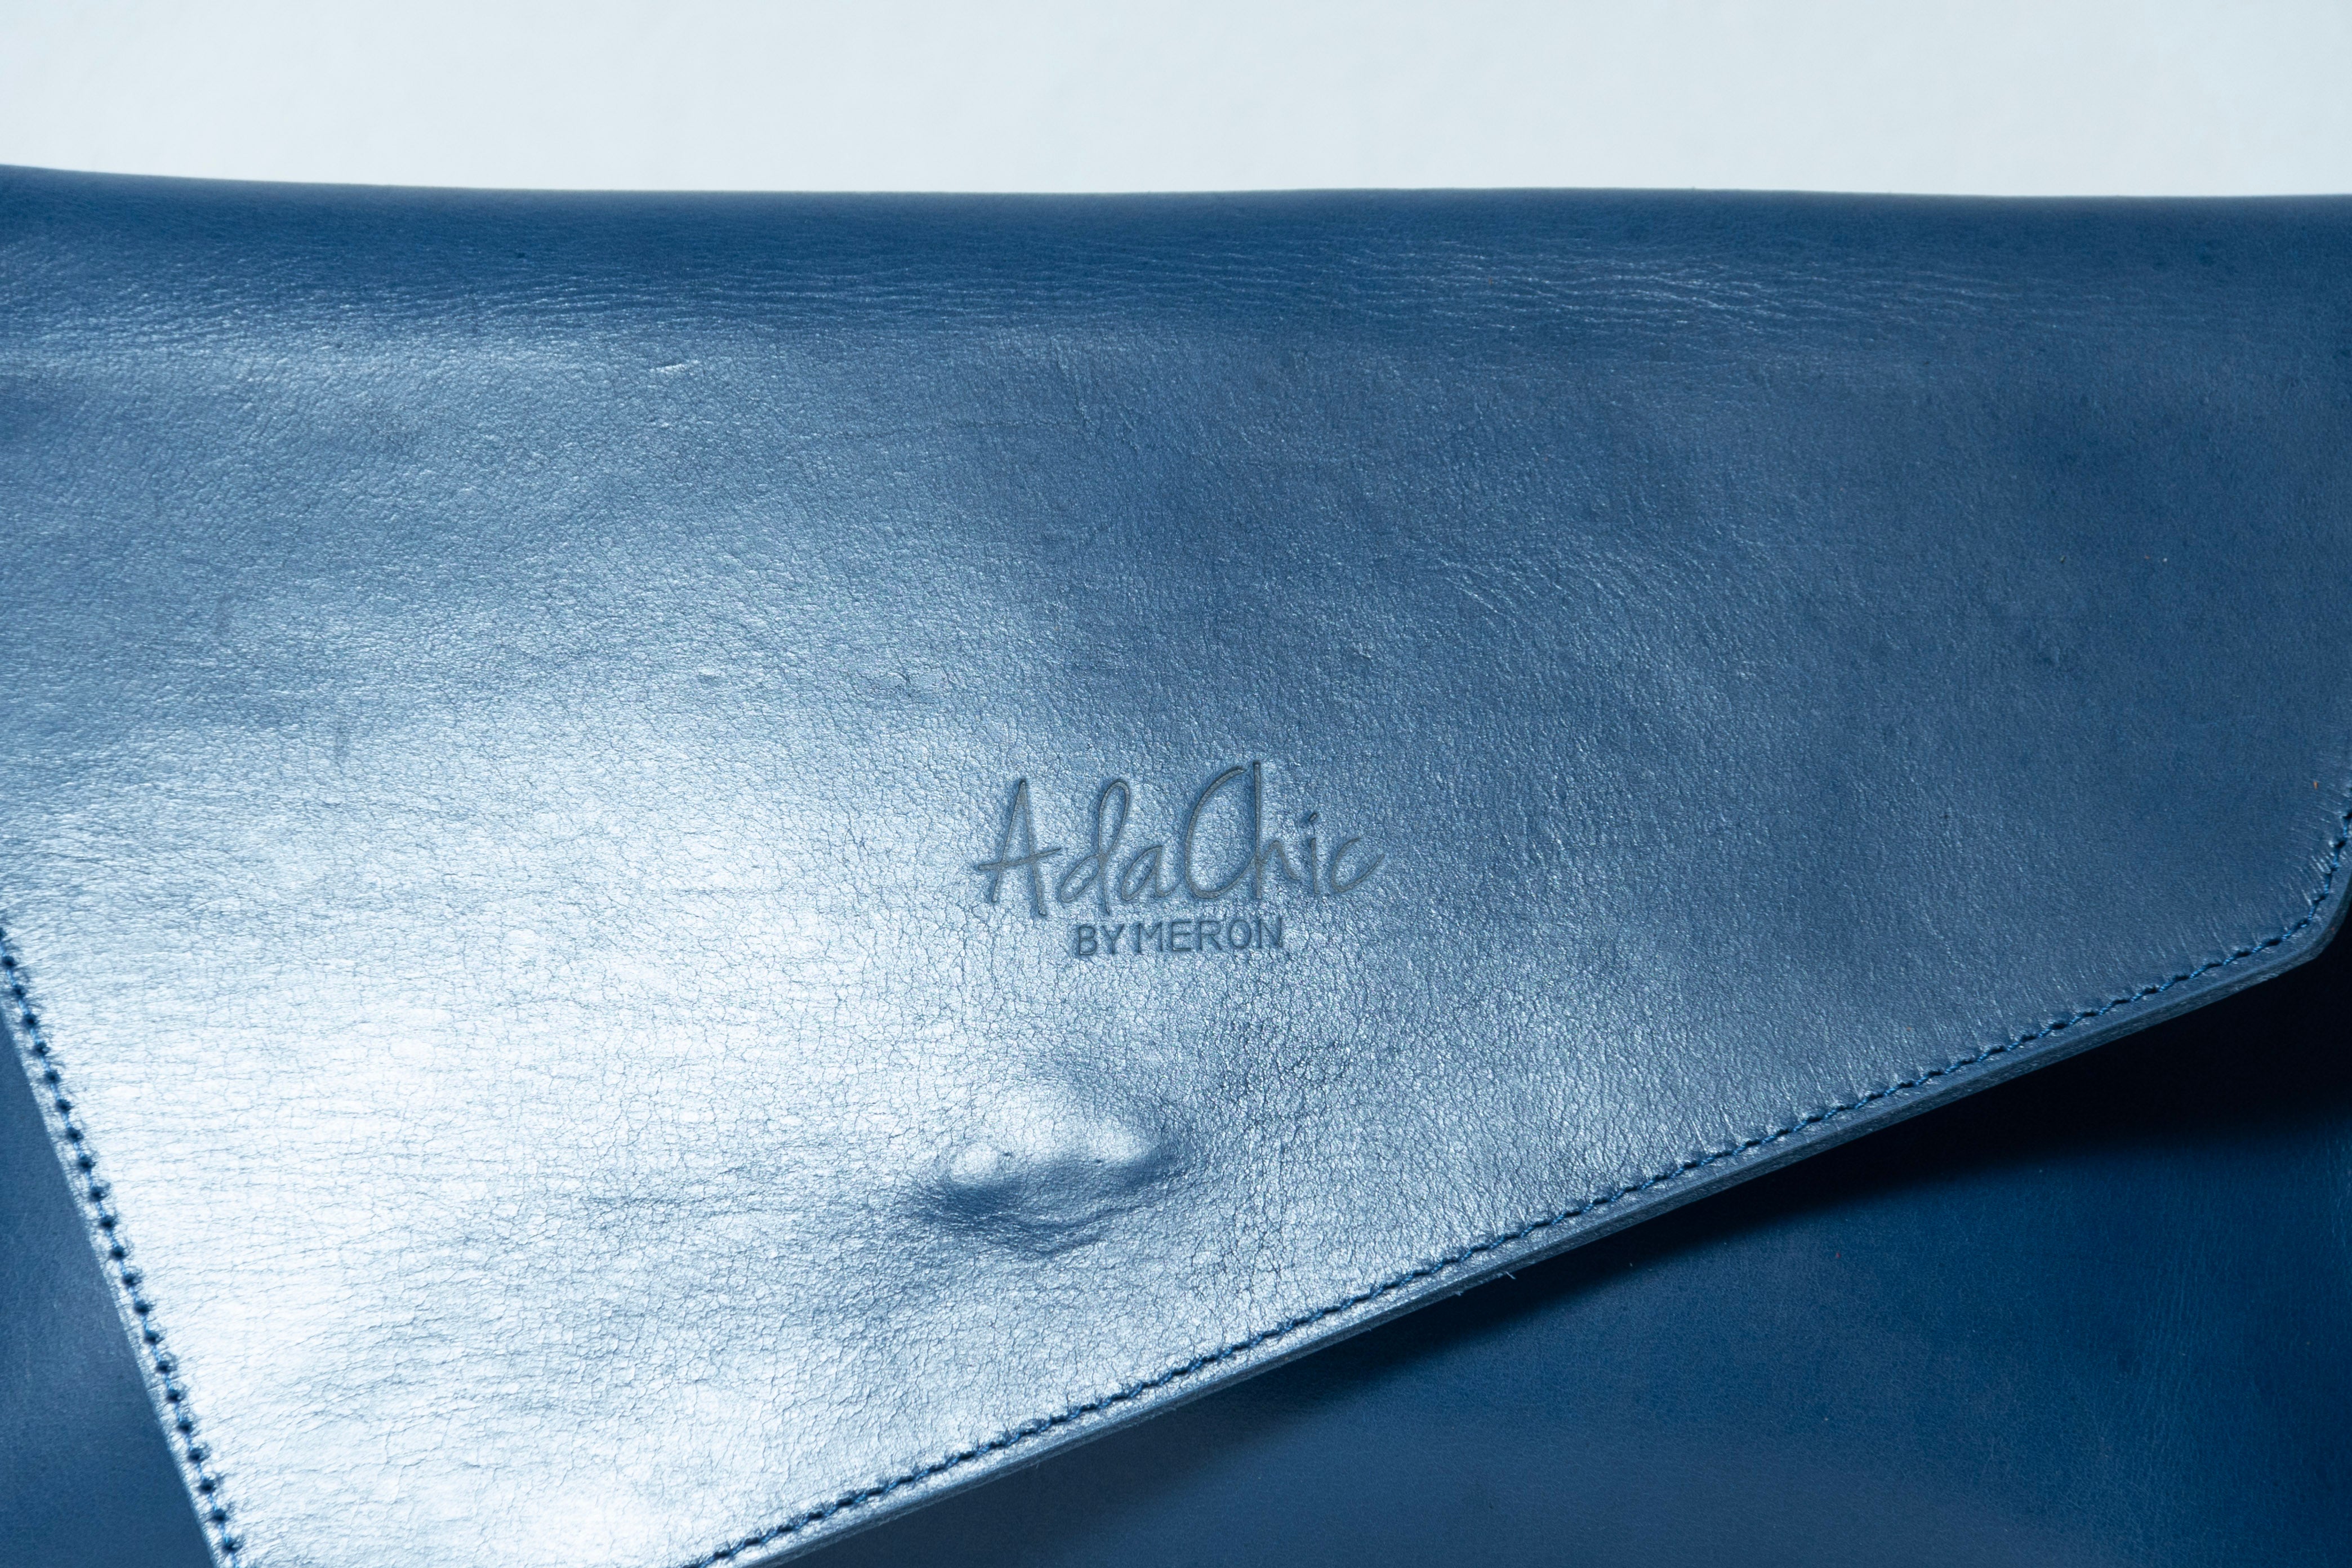 Ada Angle Sustainable Leather Clutch